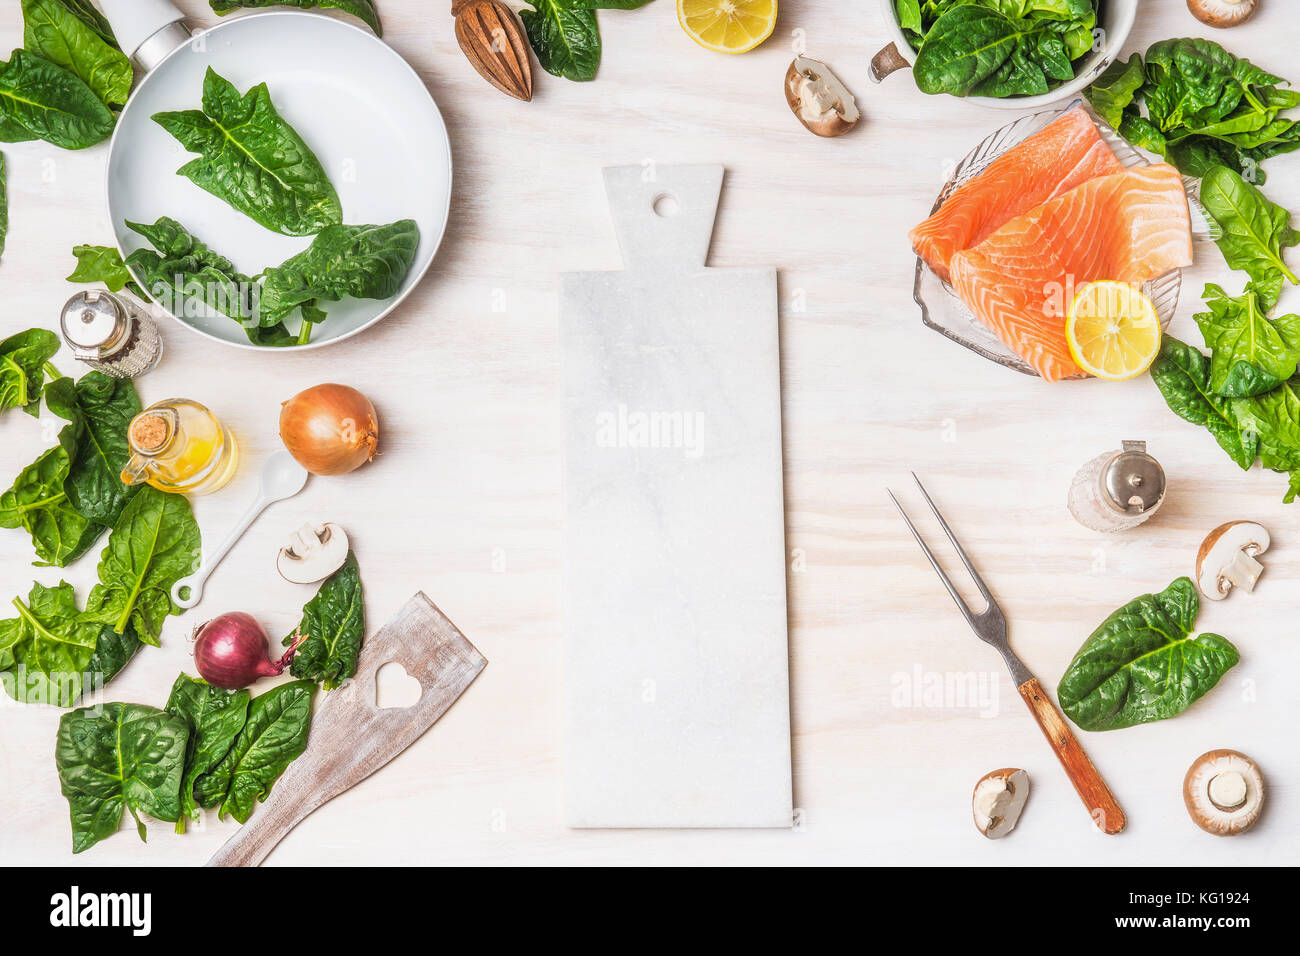 Healthy or diet  food background with cutting board, organic spinach leaves, salmon, pan ,fork and cooking ingredients on white kitchen table backgrou Stock Photo